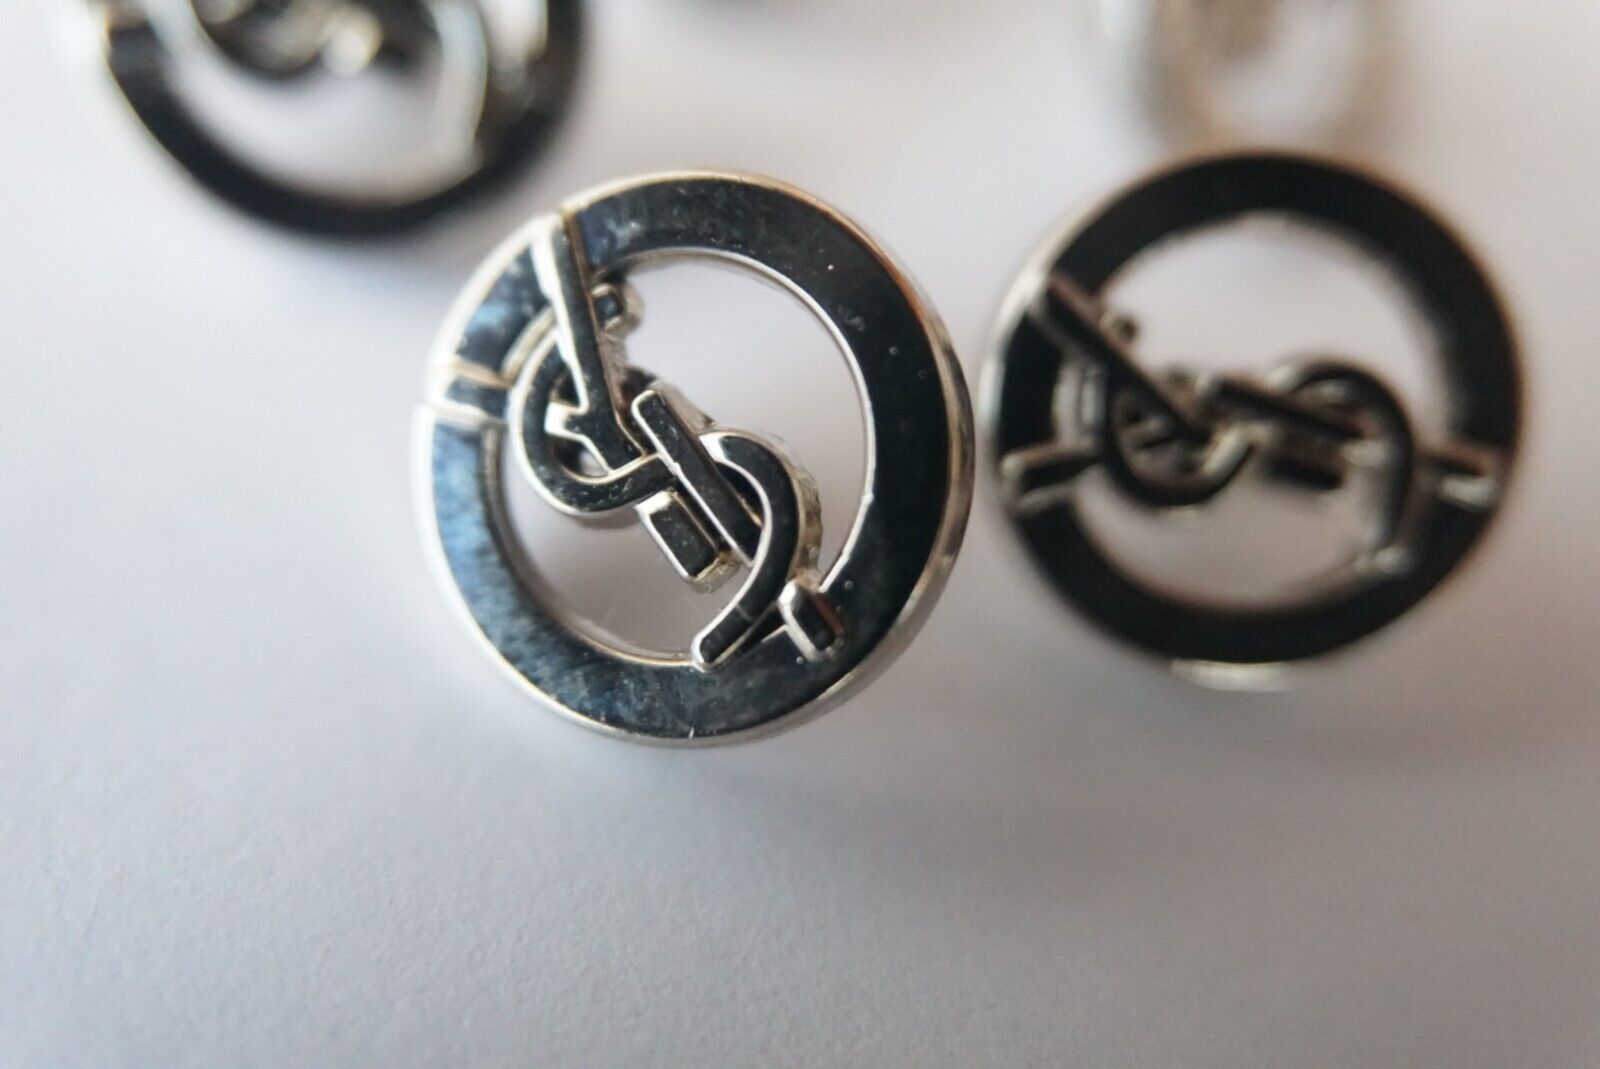 6 price for 6   100%  YSL BUTTONS  14 mm 0,4 inch Silver